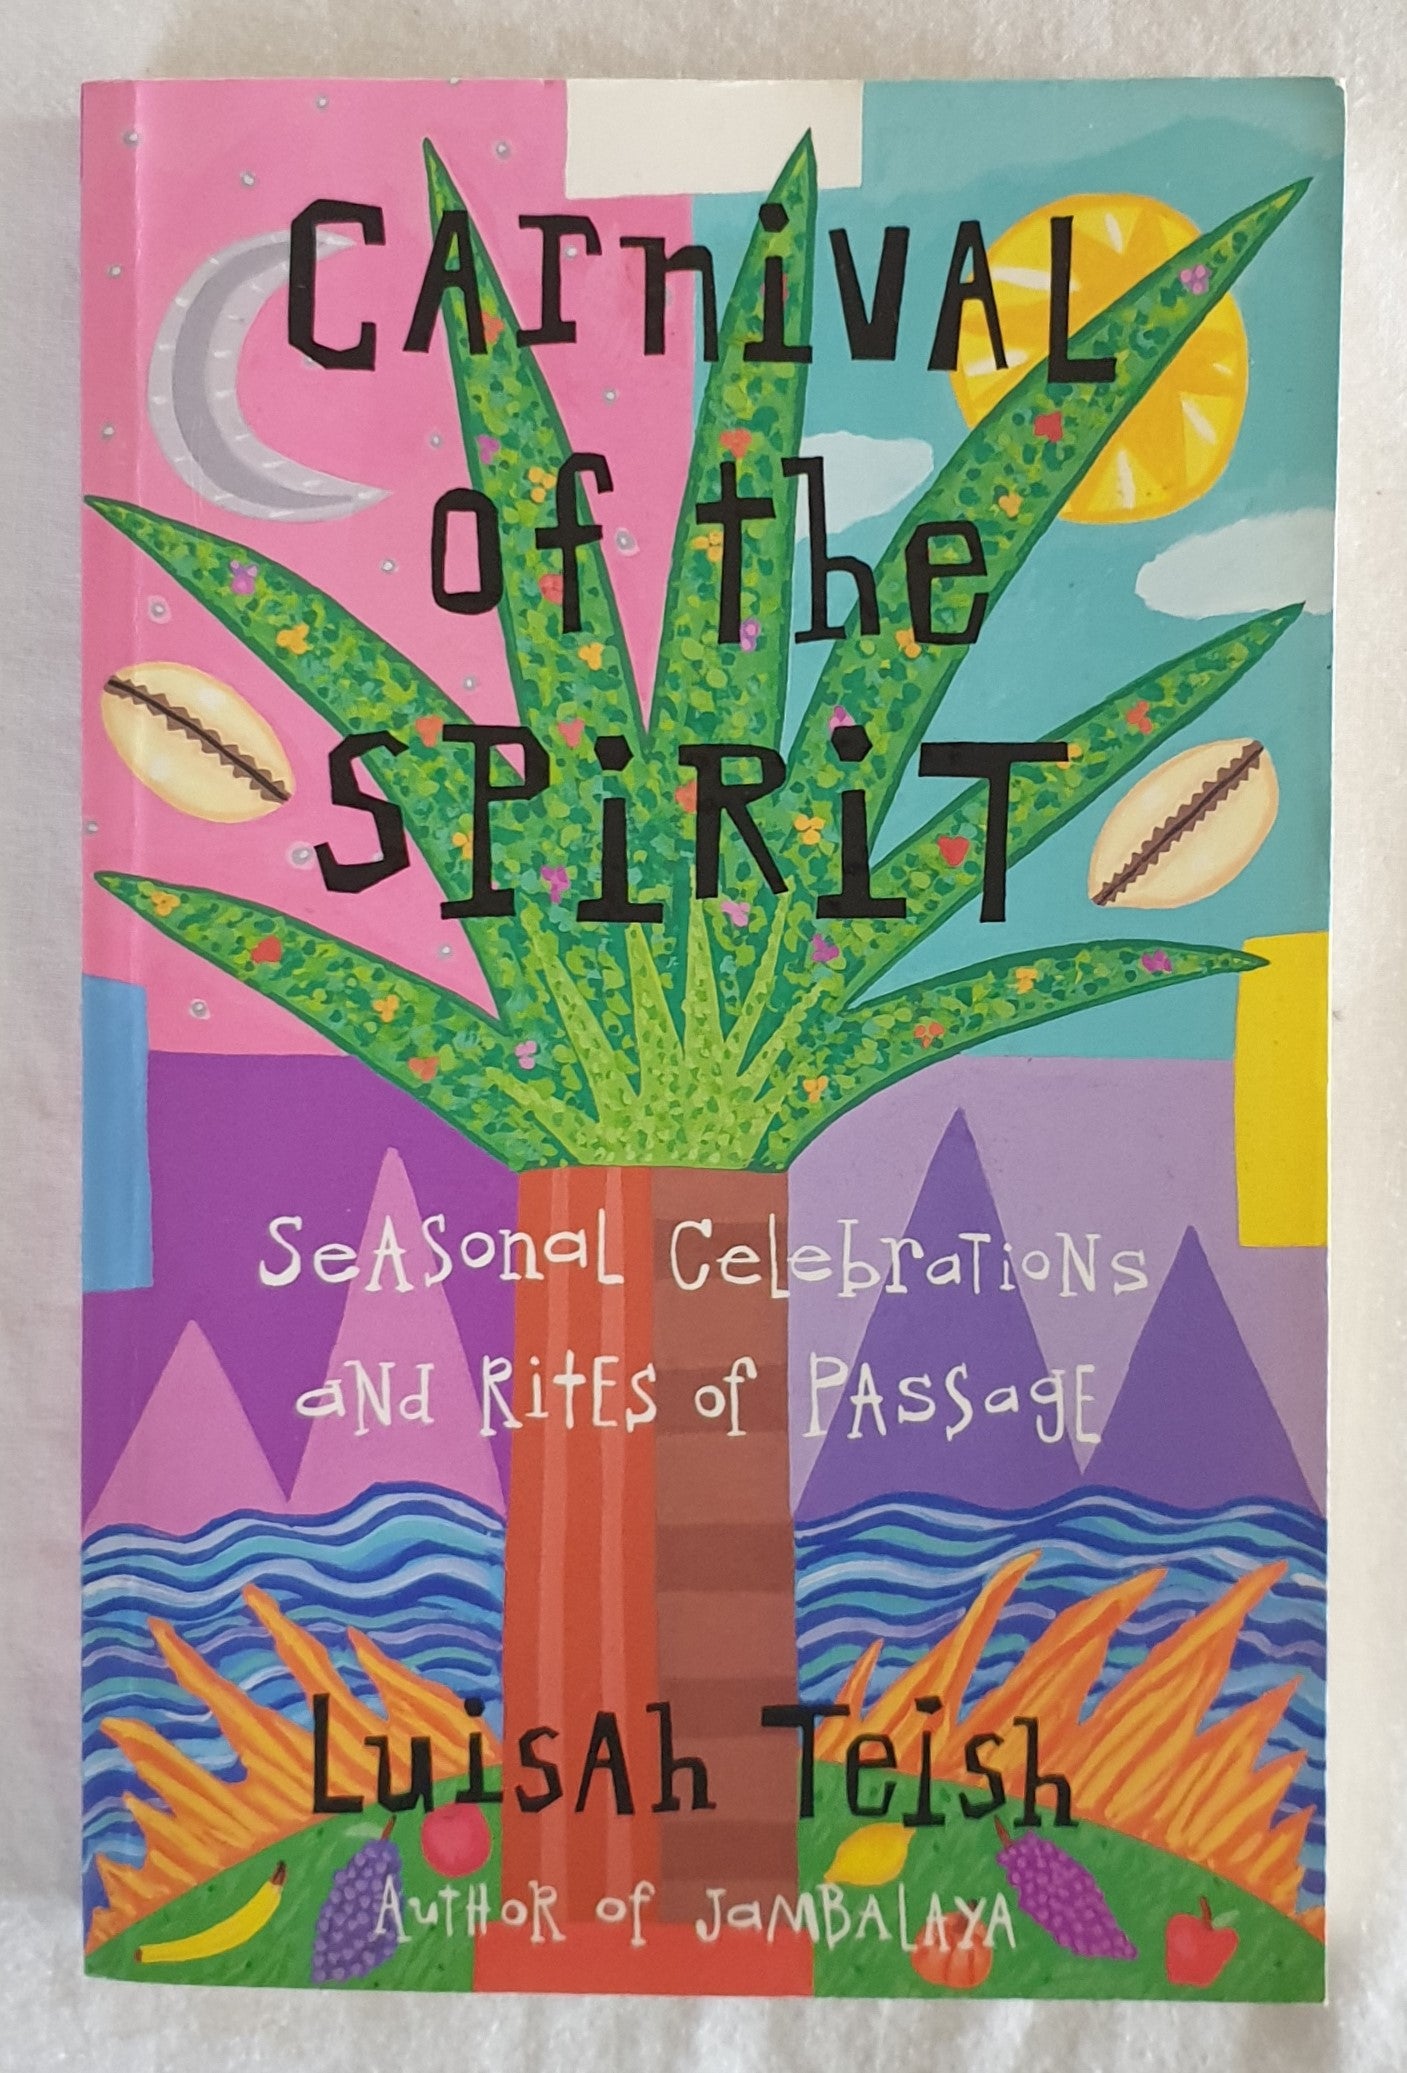 Carnival of the Spirit by Luisah Teish